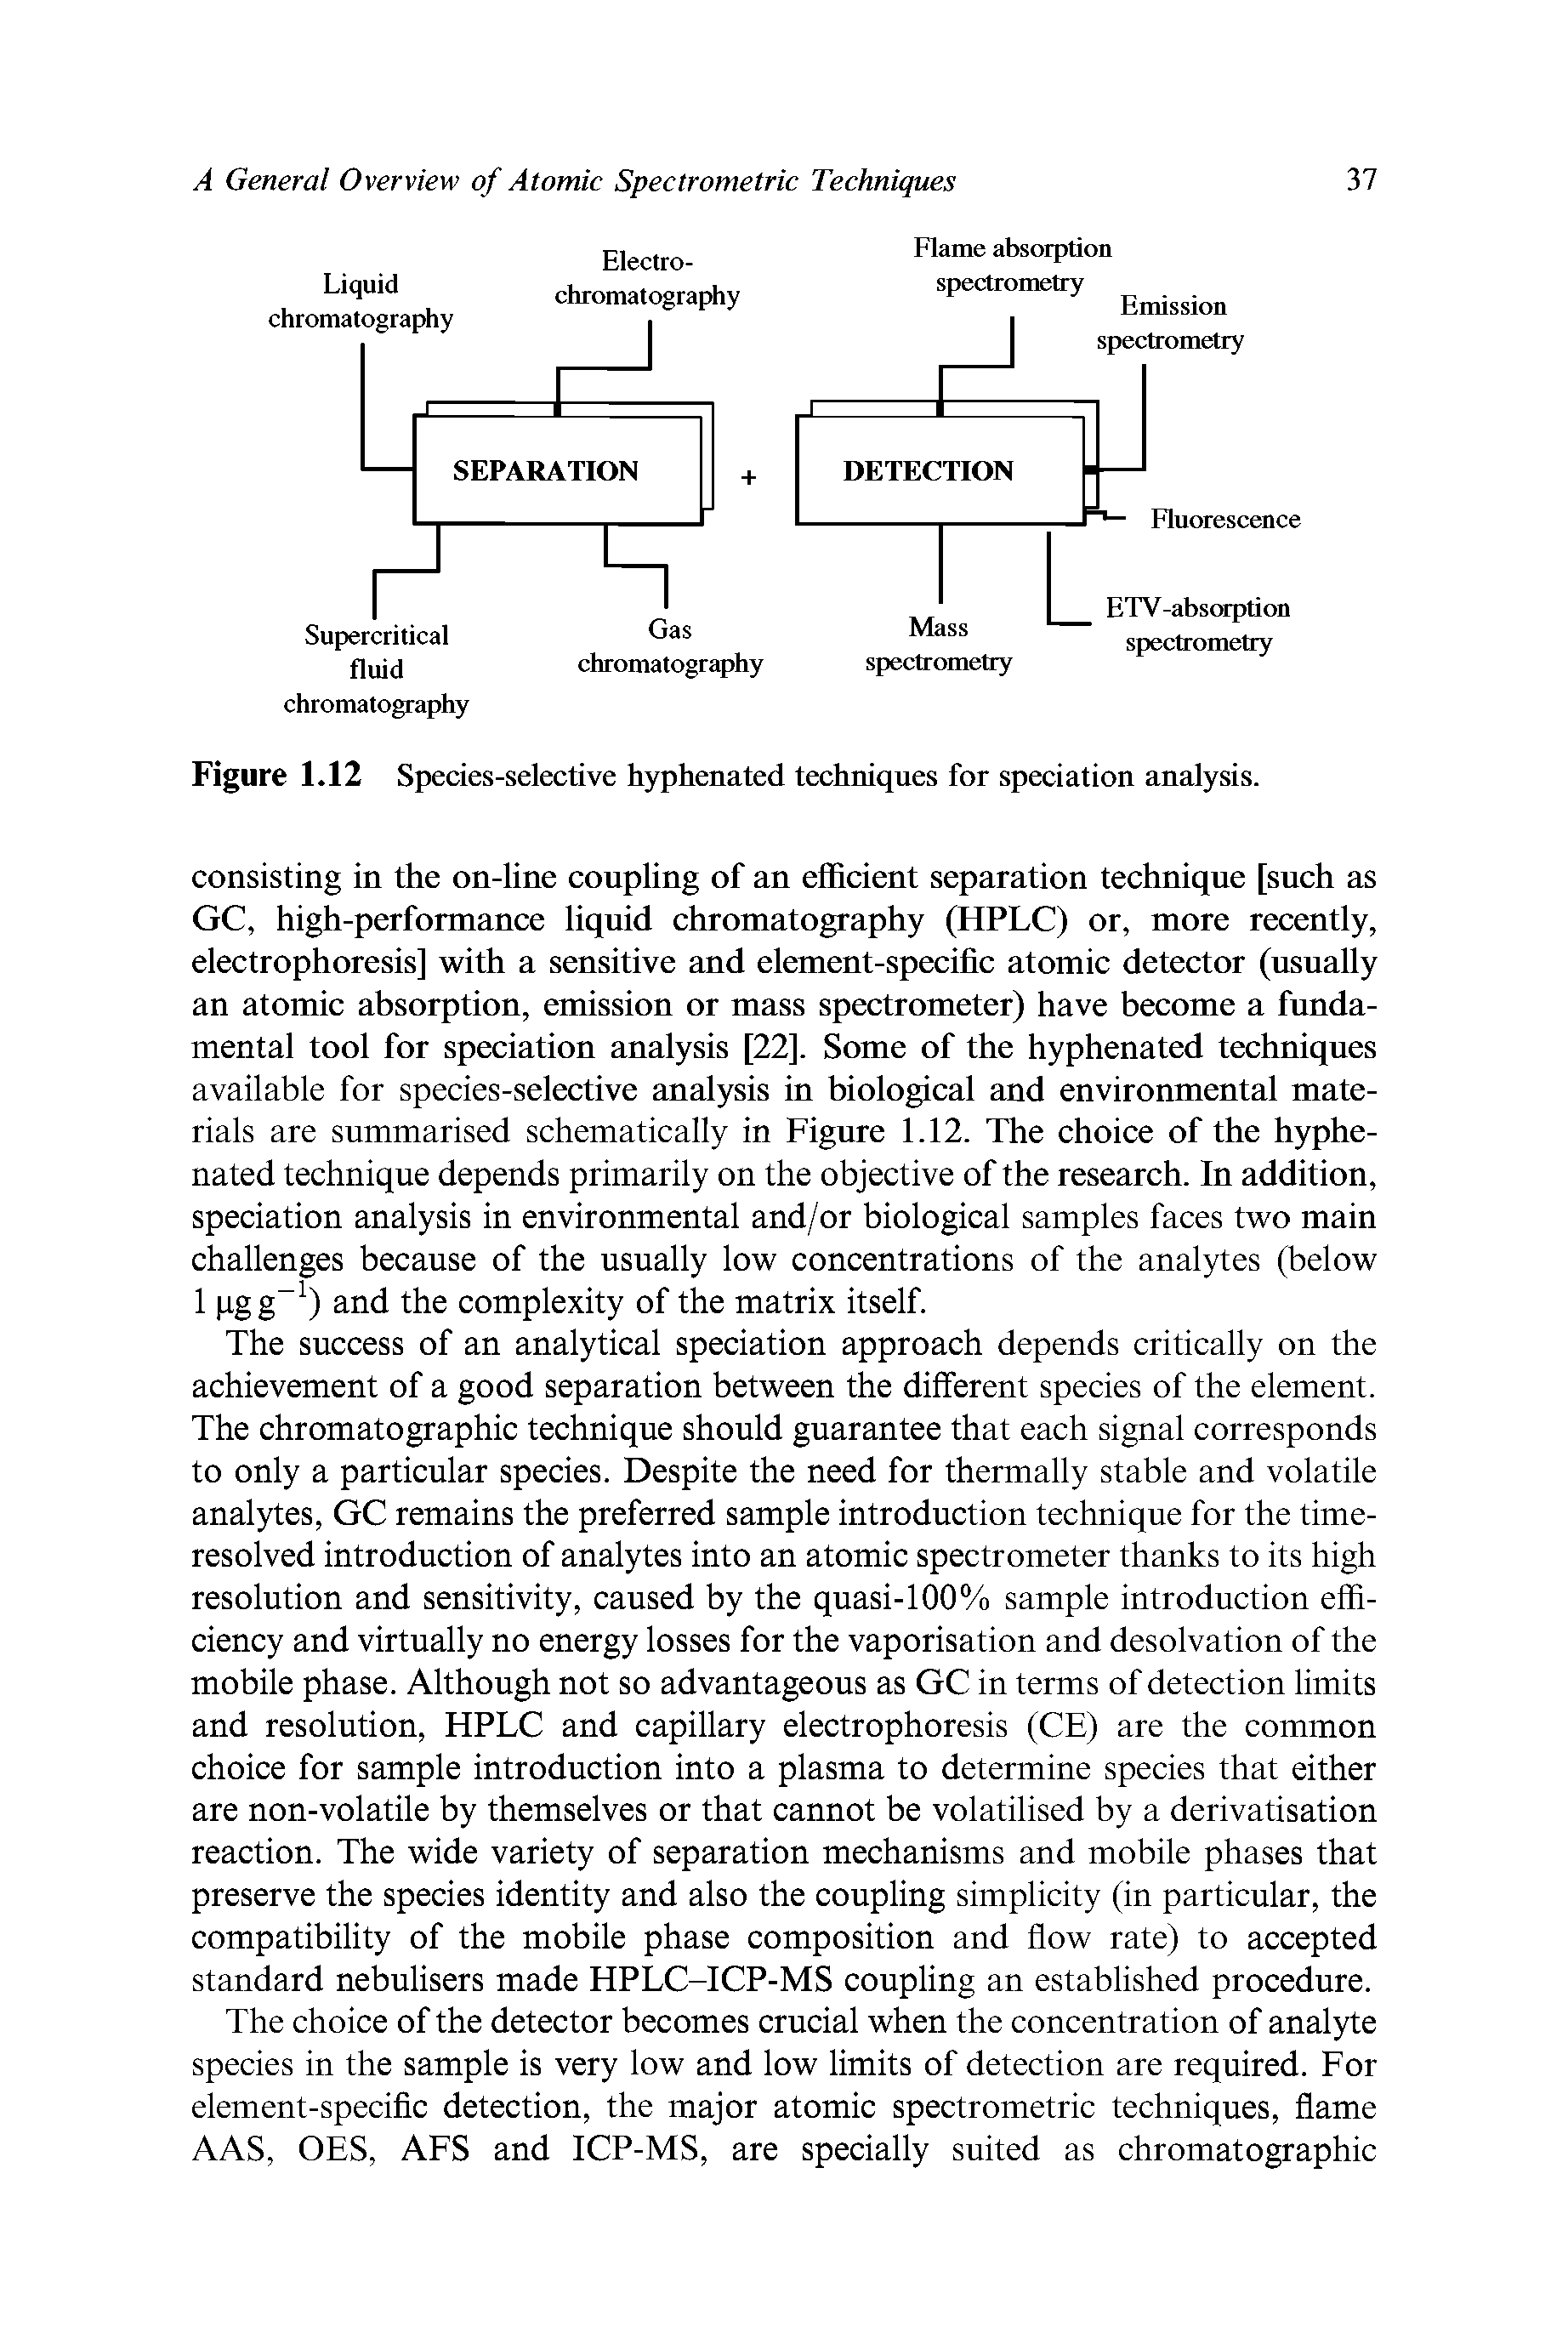 Figure 1.12 Species-selective hyphenated techniques for speciation analysis.